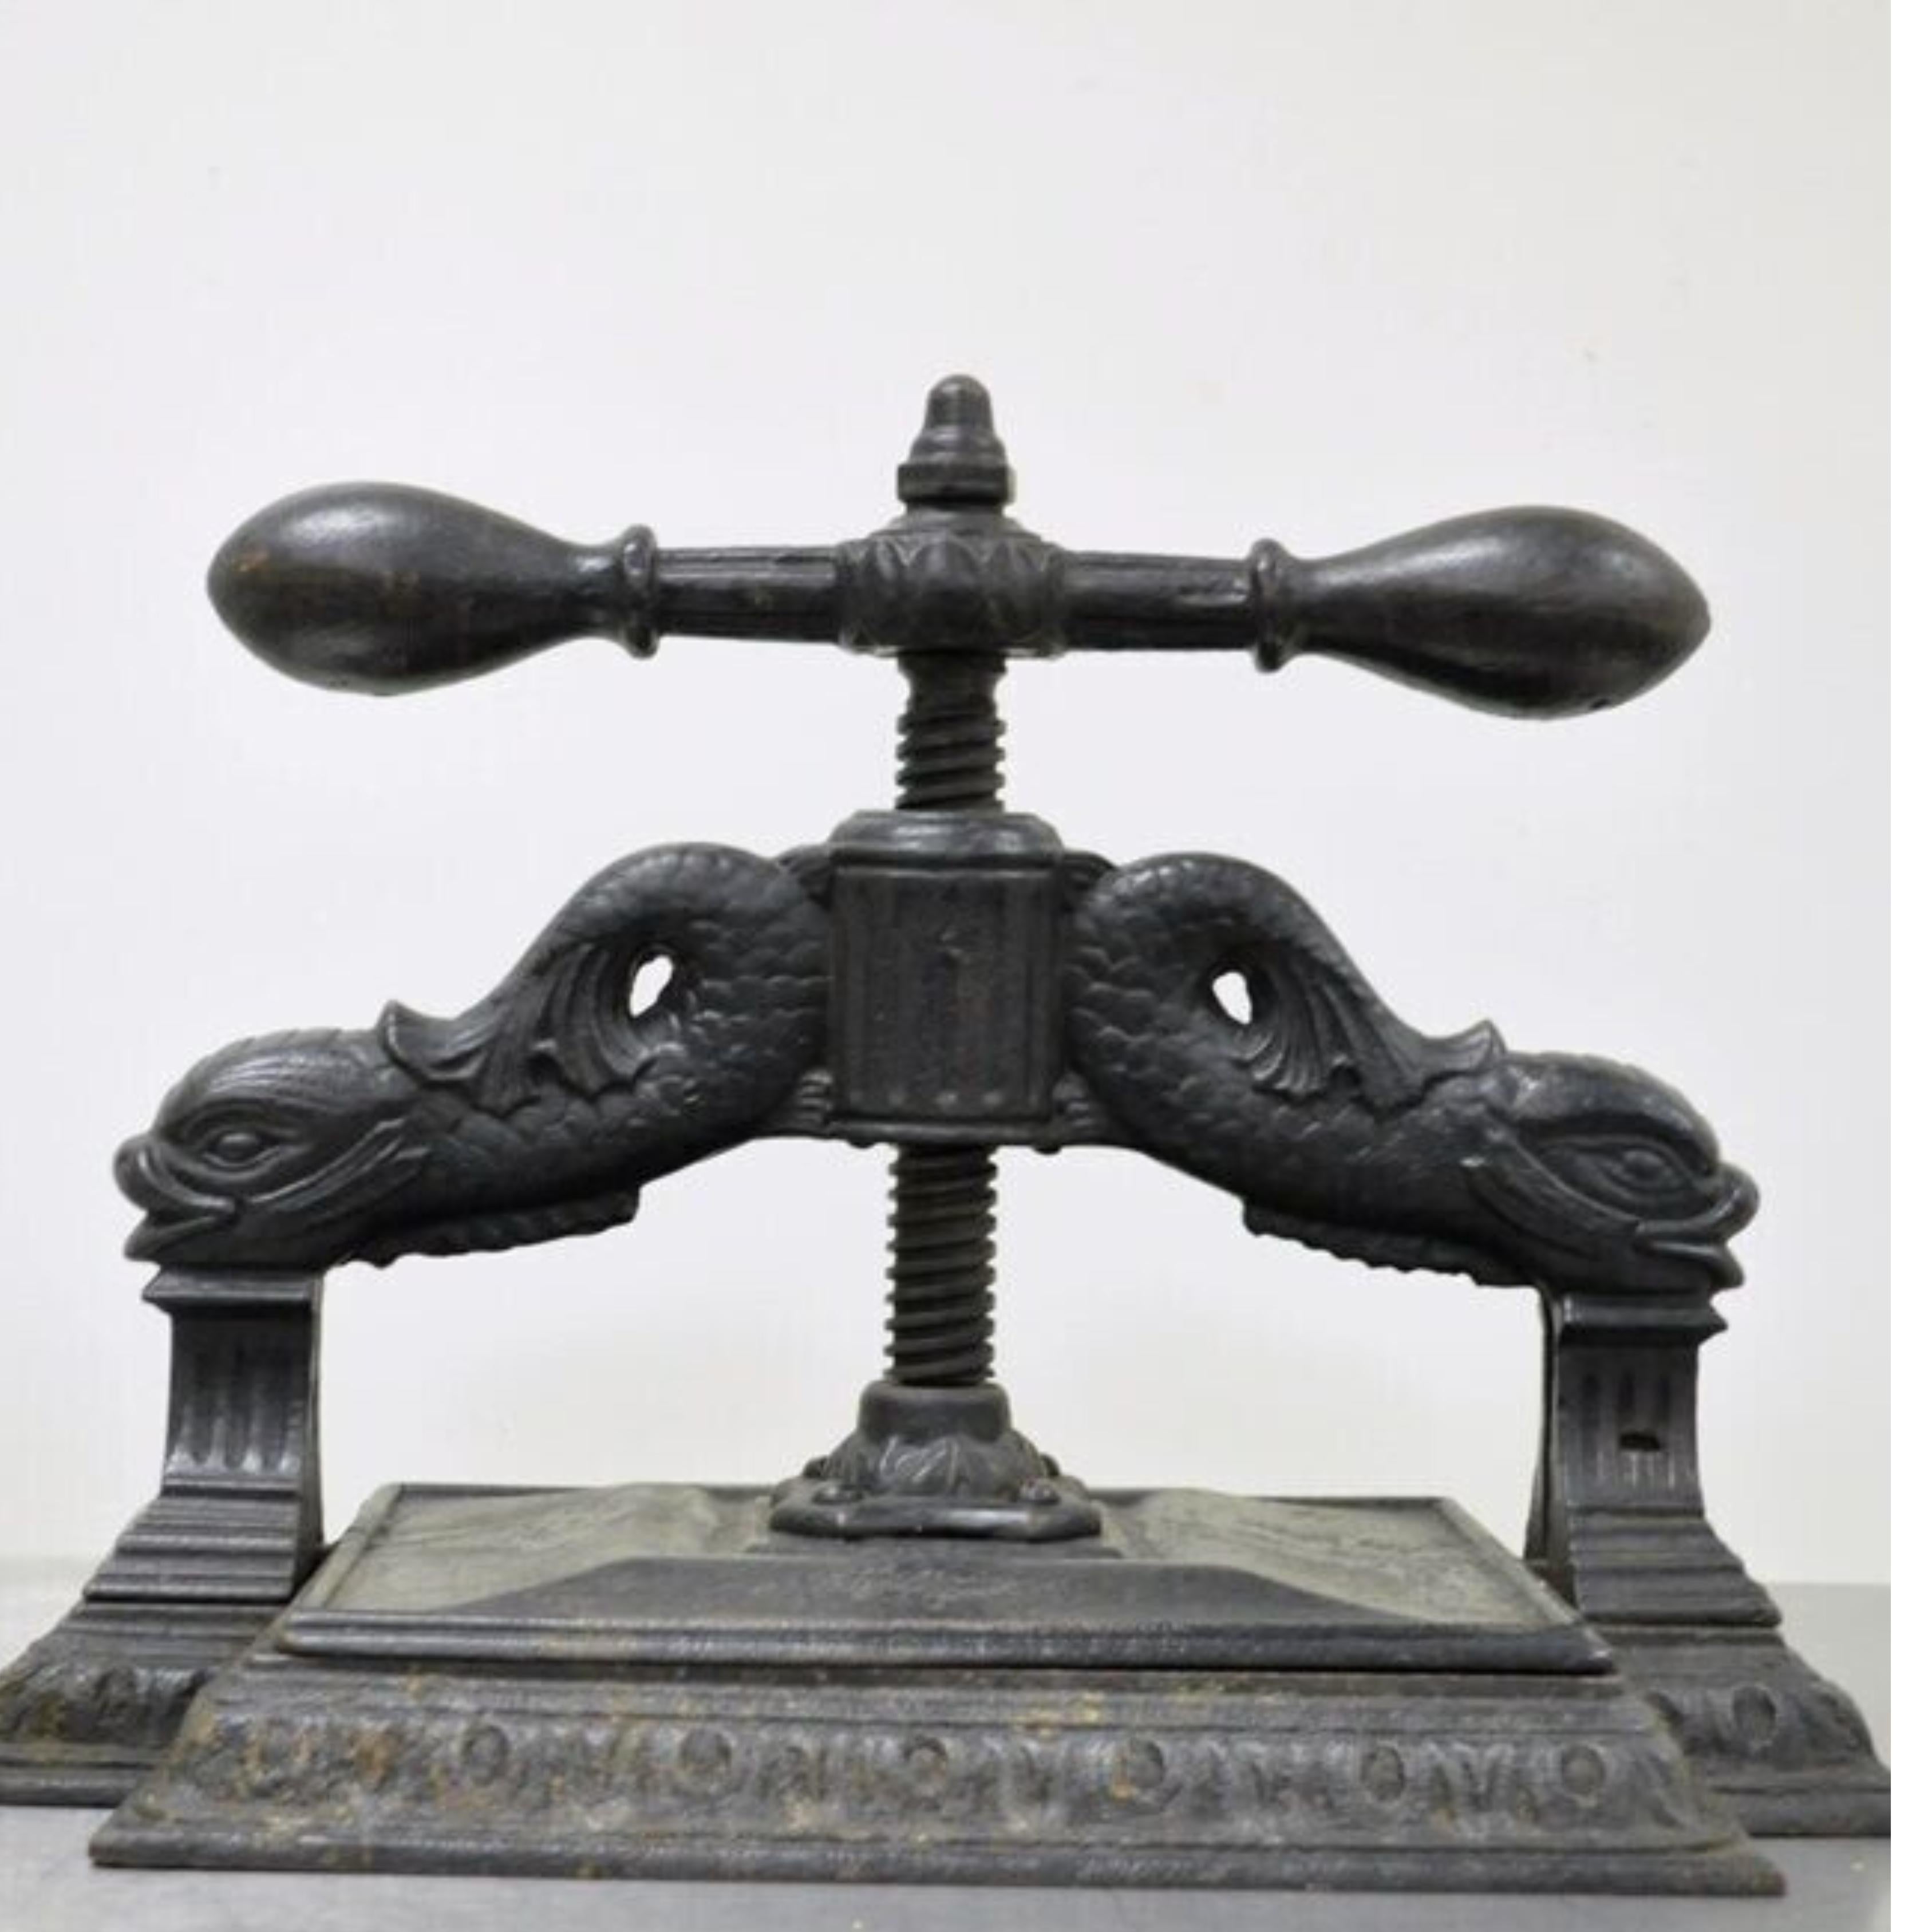 Antique 19th C. Cast Iron Classical Figural Dolphin Victorian Book Press. Item features Intricate supports with dolphins and fluted columns, acanthus accented base, substantial and heavy in weight, believed to be by Russell Erwin Manufacturing Co.